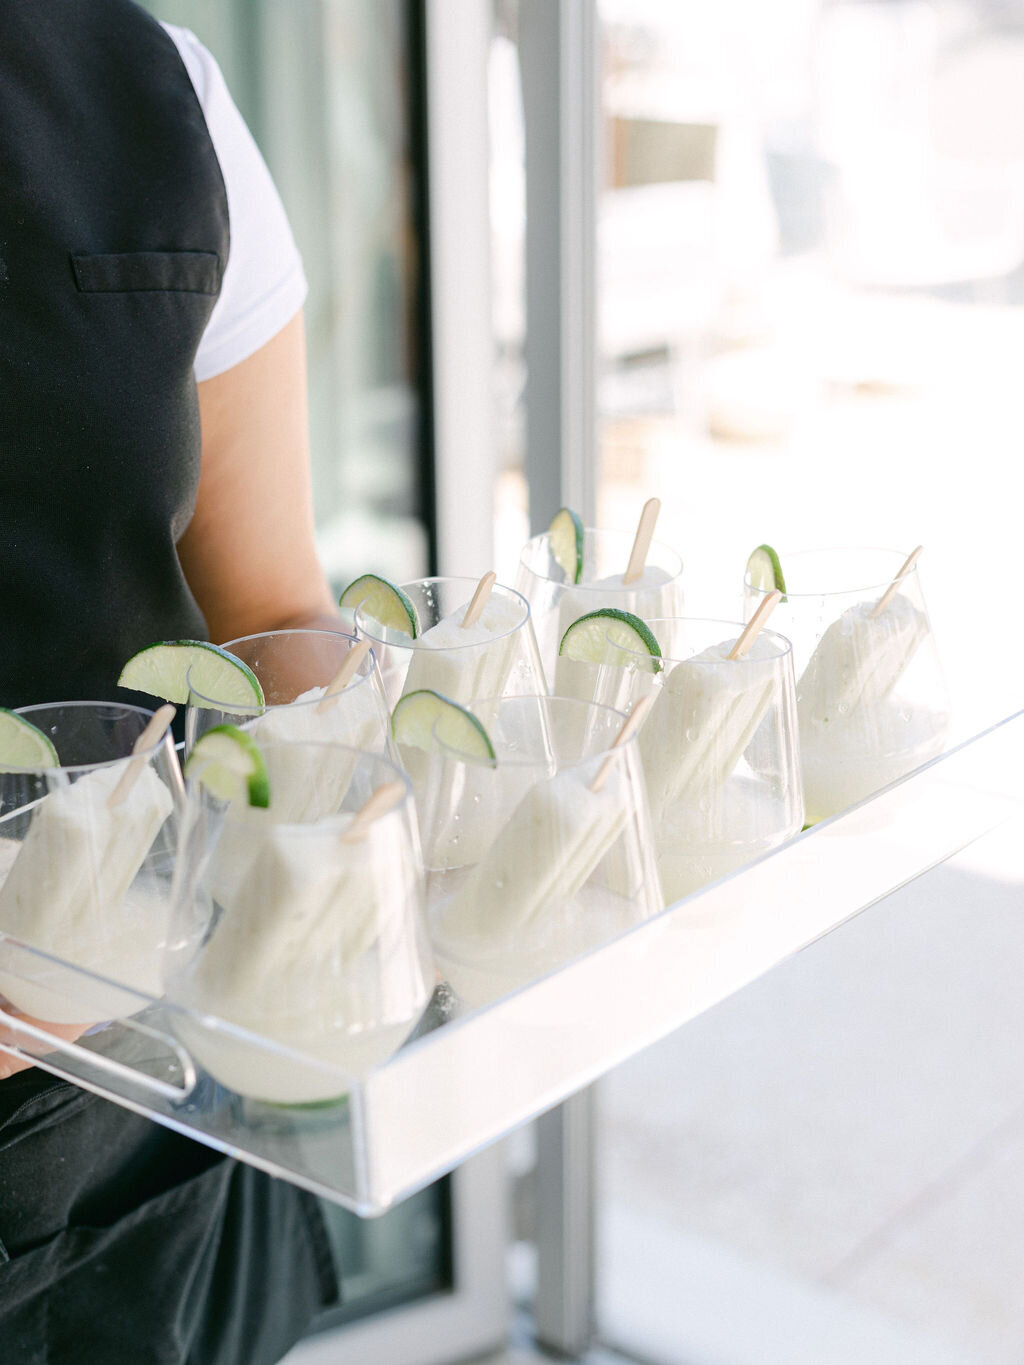 tray of wedding ice pops with cucumber  for summer  wedding reception at Rosemary beach Florida